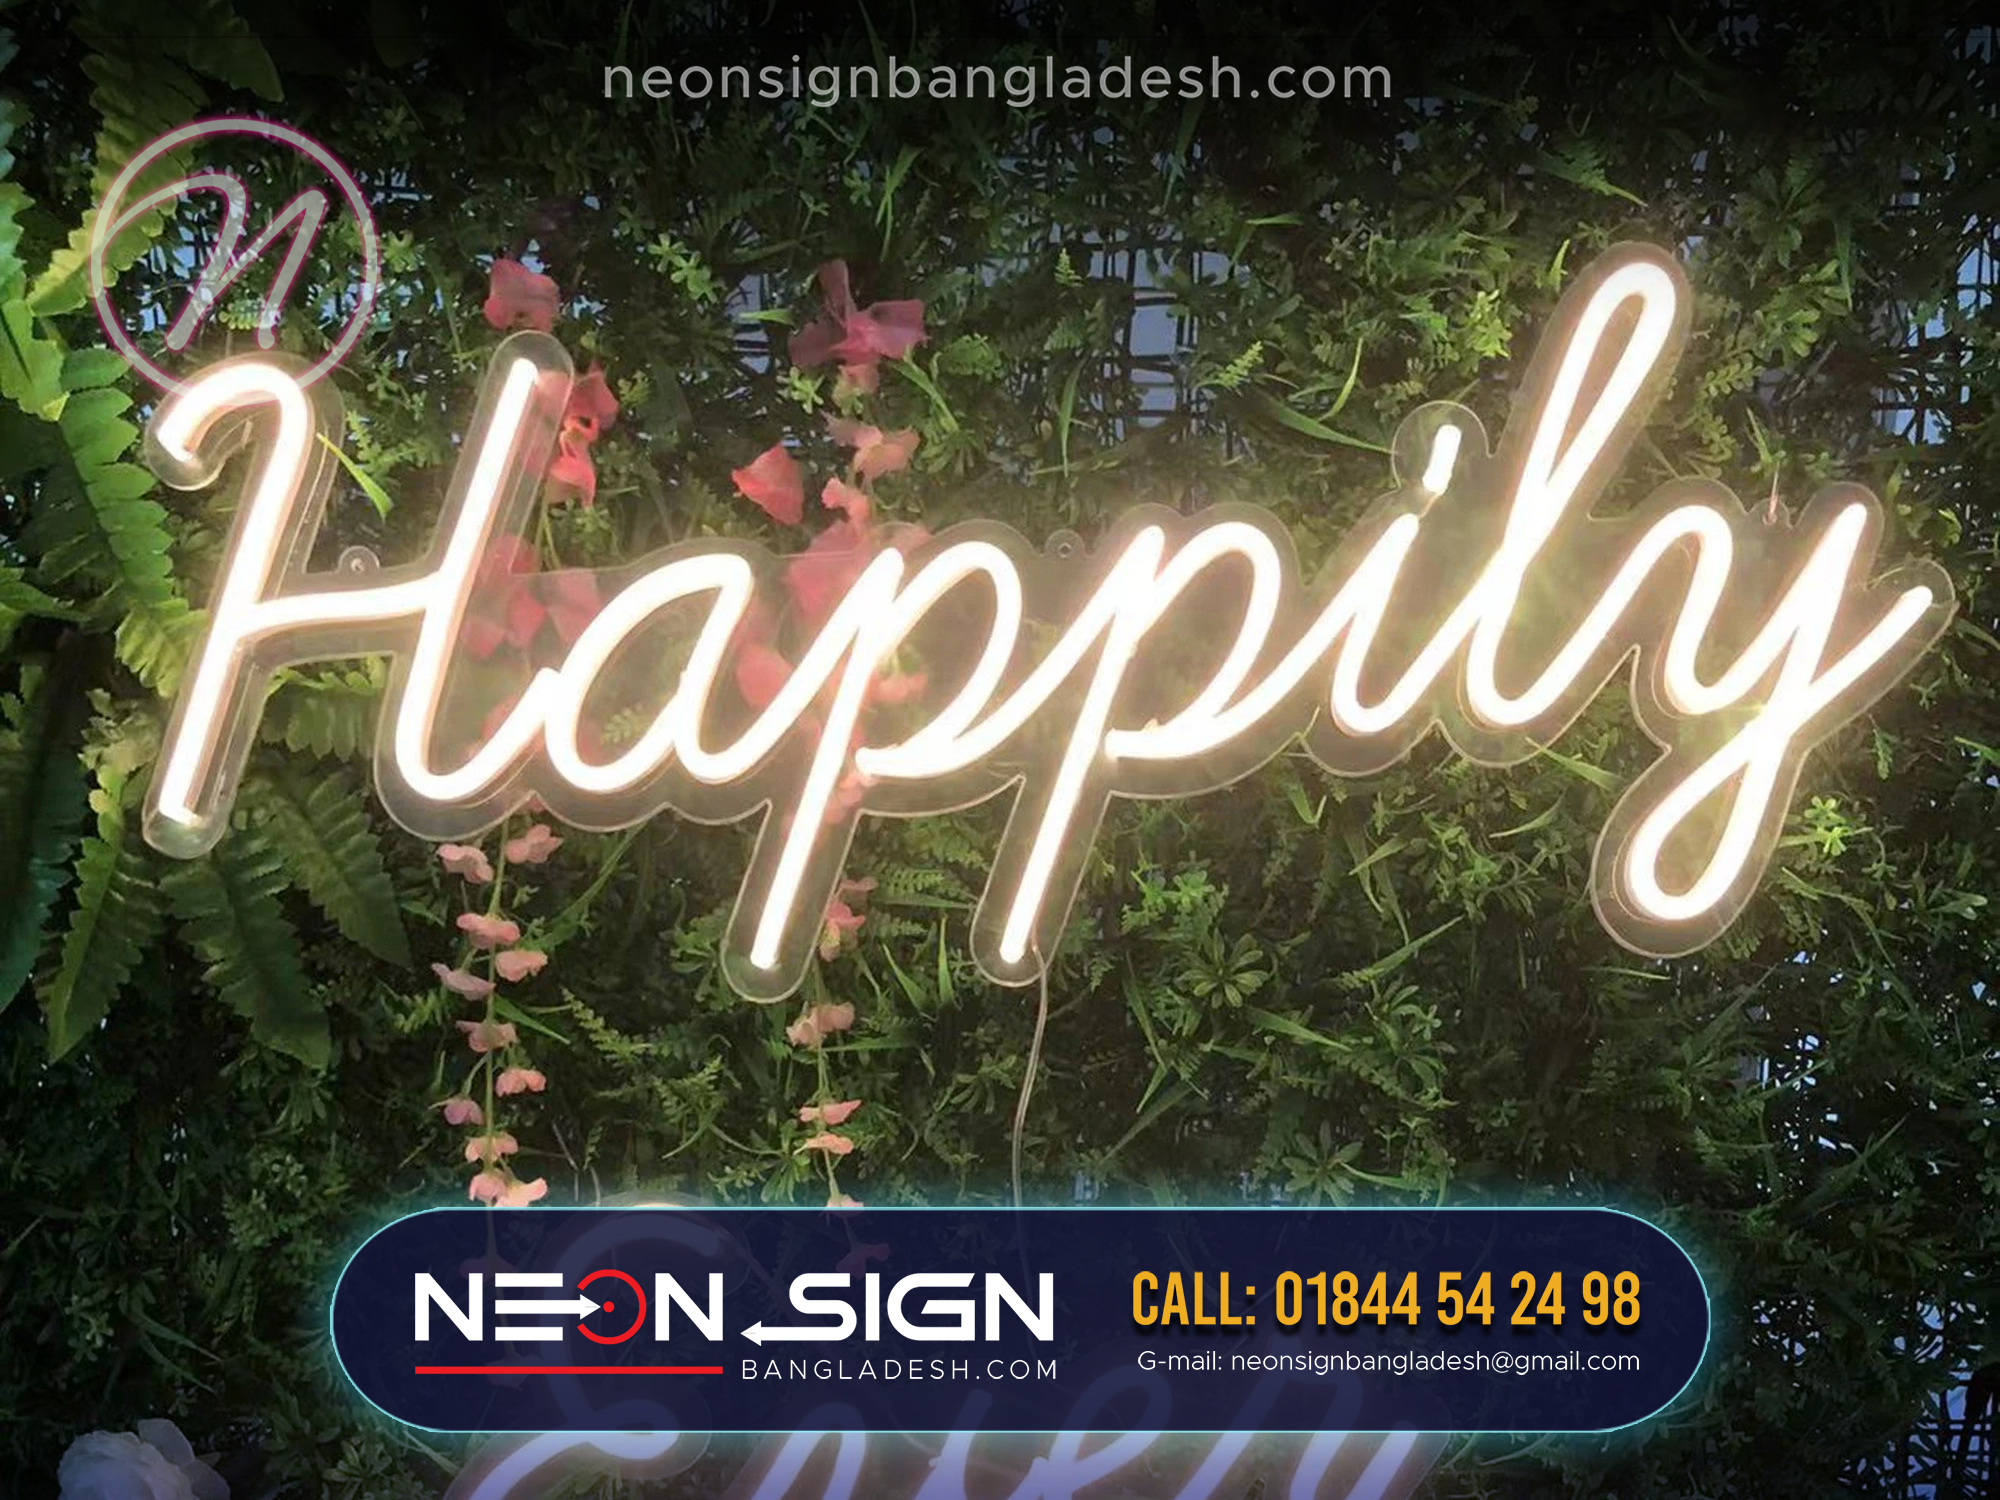 Happy birthday neon signs bd price in bangladesh Happy birthday neon signs bd price Happy birthday neon signs bd online